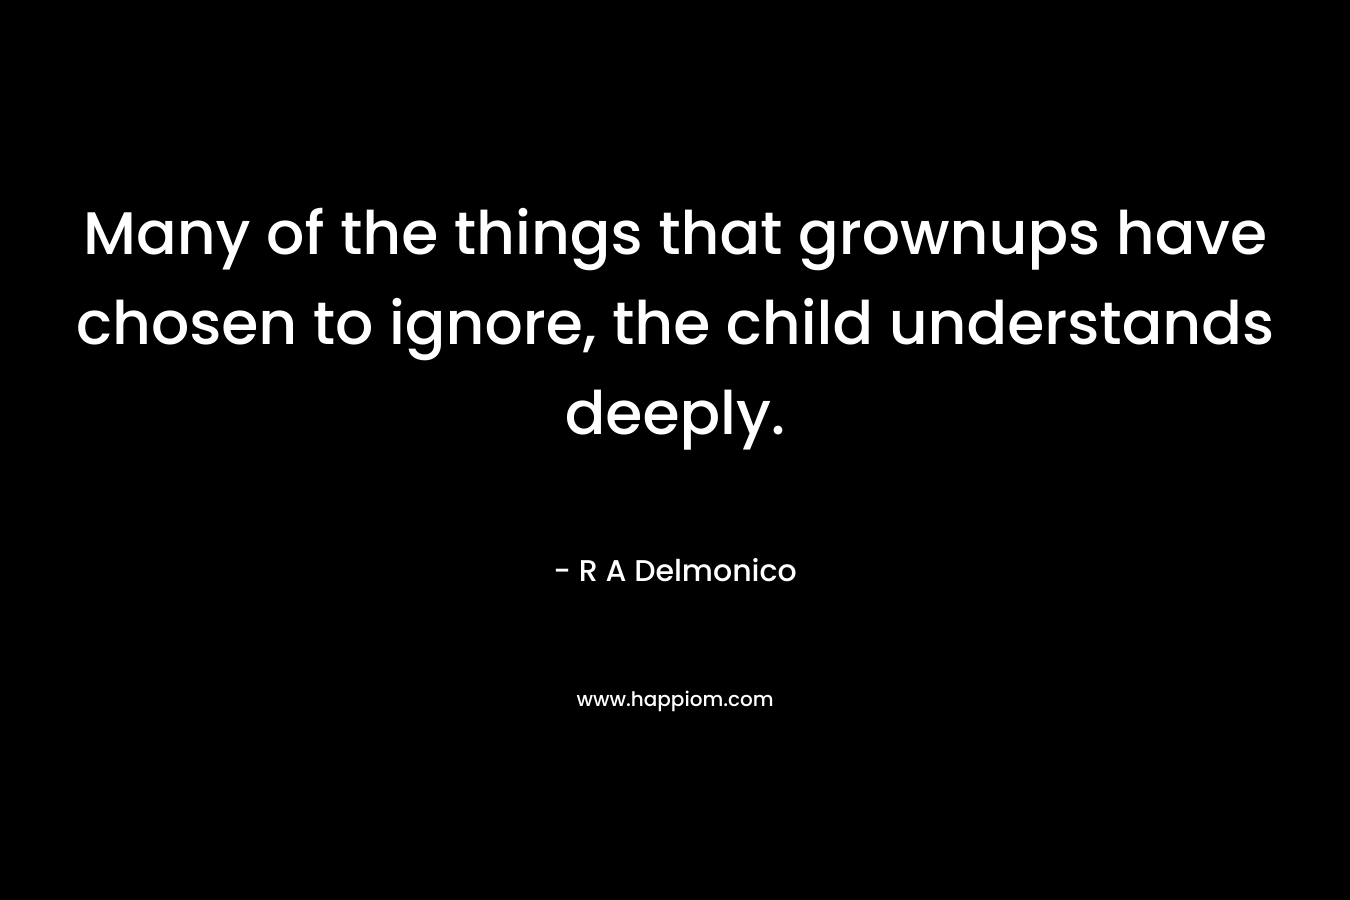 Many of the things that grownups have chosen to ignore, the child understands deeply. – R A Delmonico